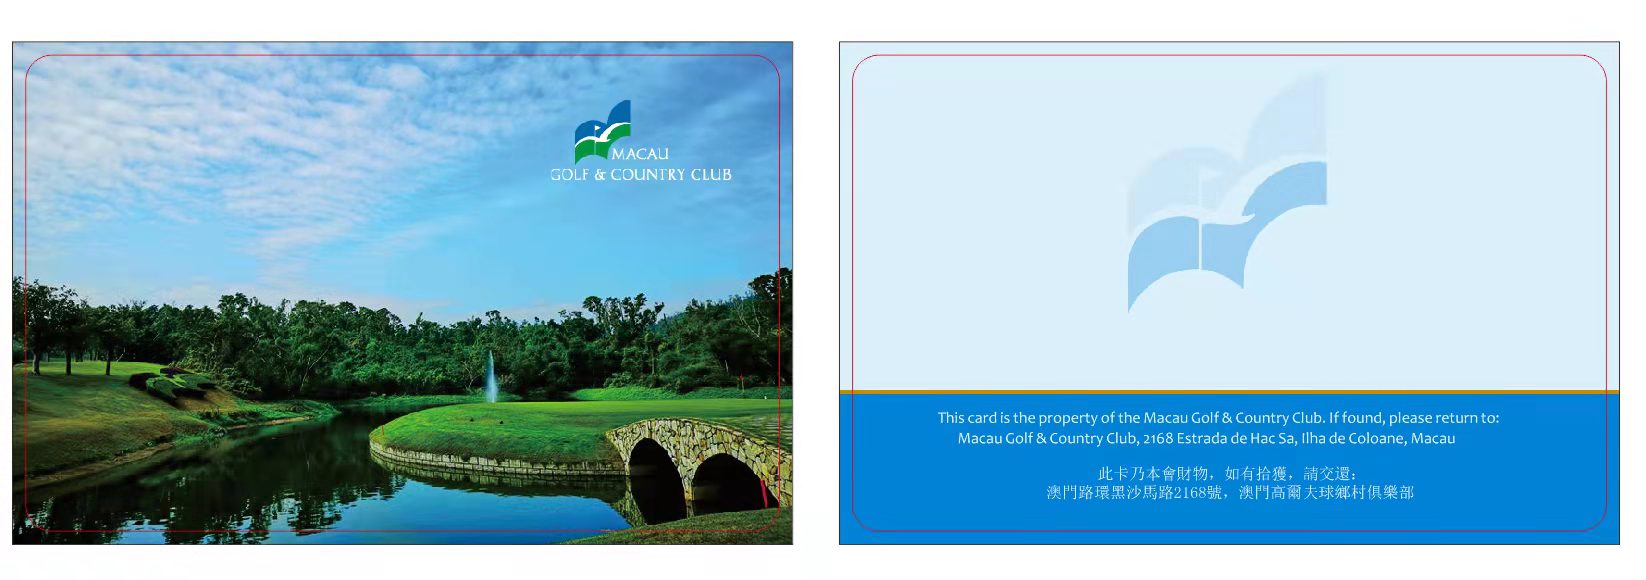 Excelsoo Cases Reference: Macau Golf & Country Club Long Range UHF Parking System Card for VIP Membership-2